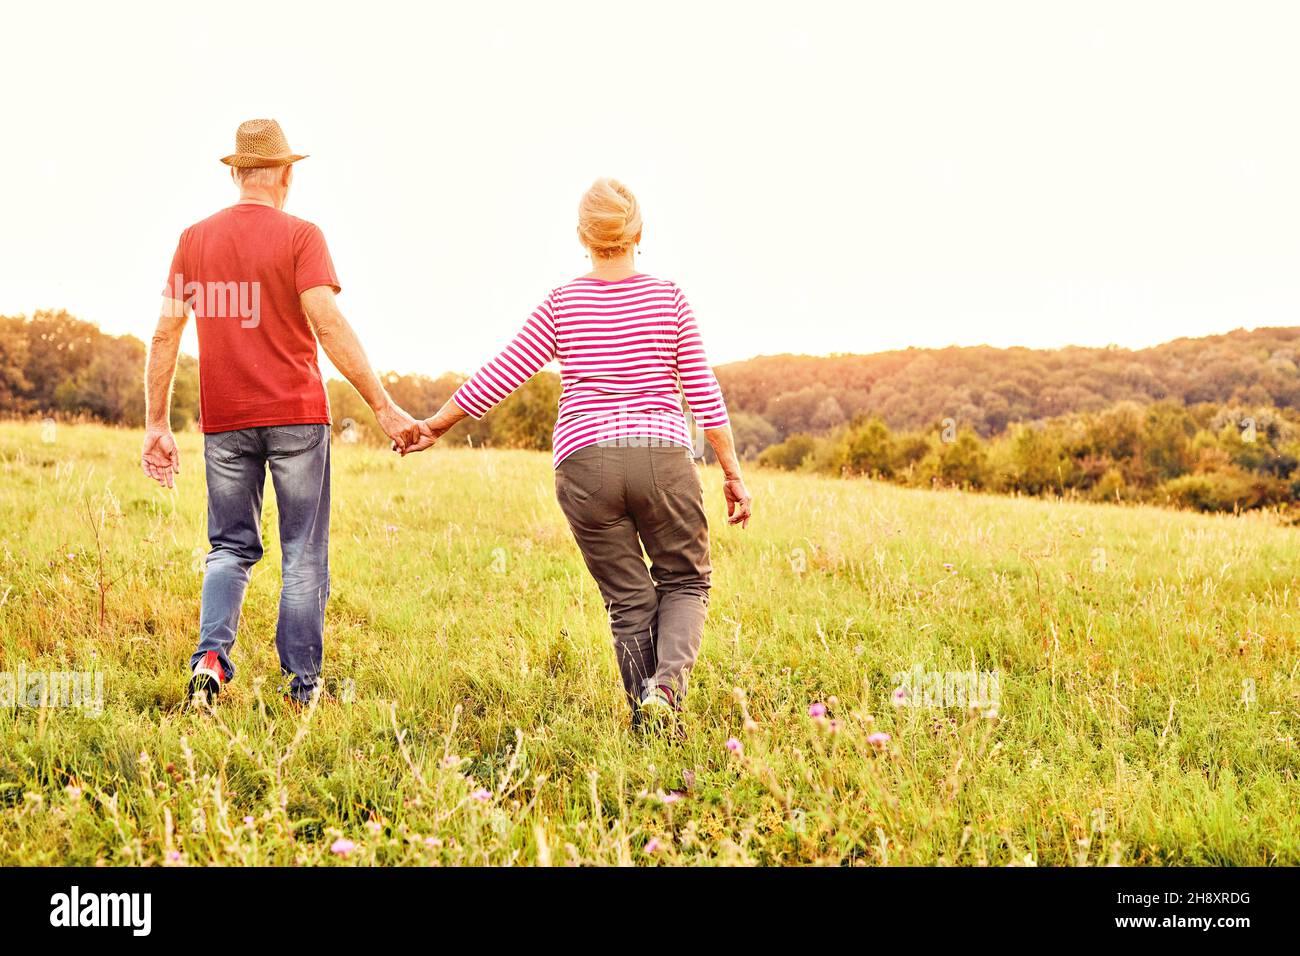 woman man outdoor senior couple happy lifestyle retirement together smiling love old nature mature back view walking future hope happy holding hands Stock Photo